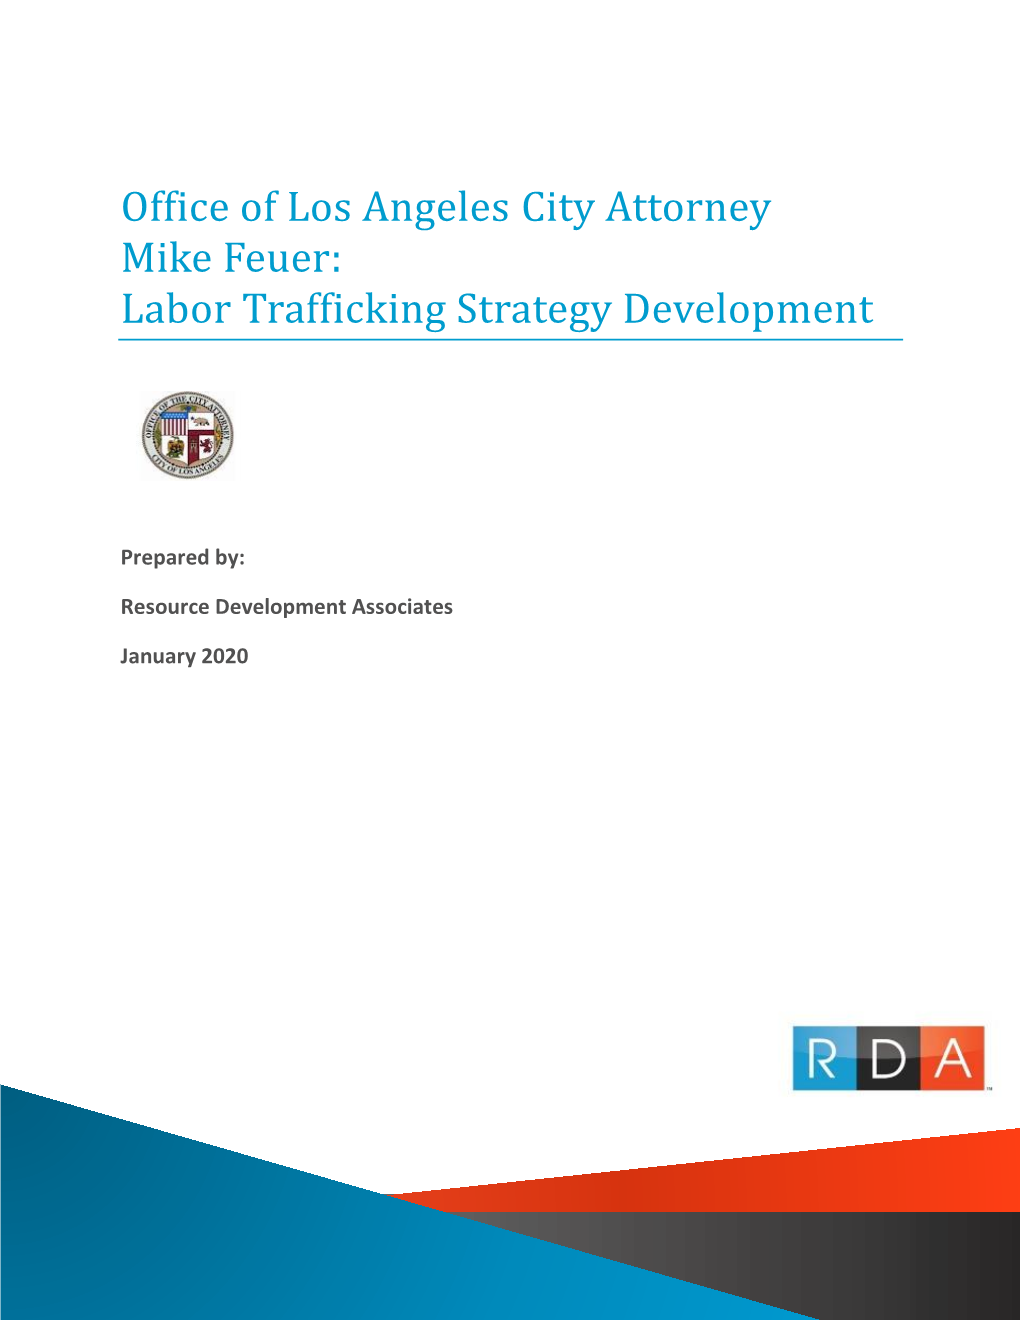 Office of Los Angeles City Attorney Mike Feuer: Labor Trafficking Strategy Development